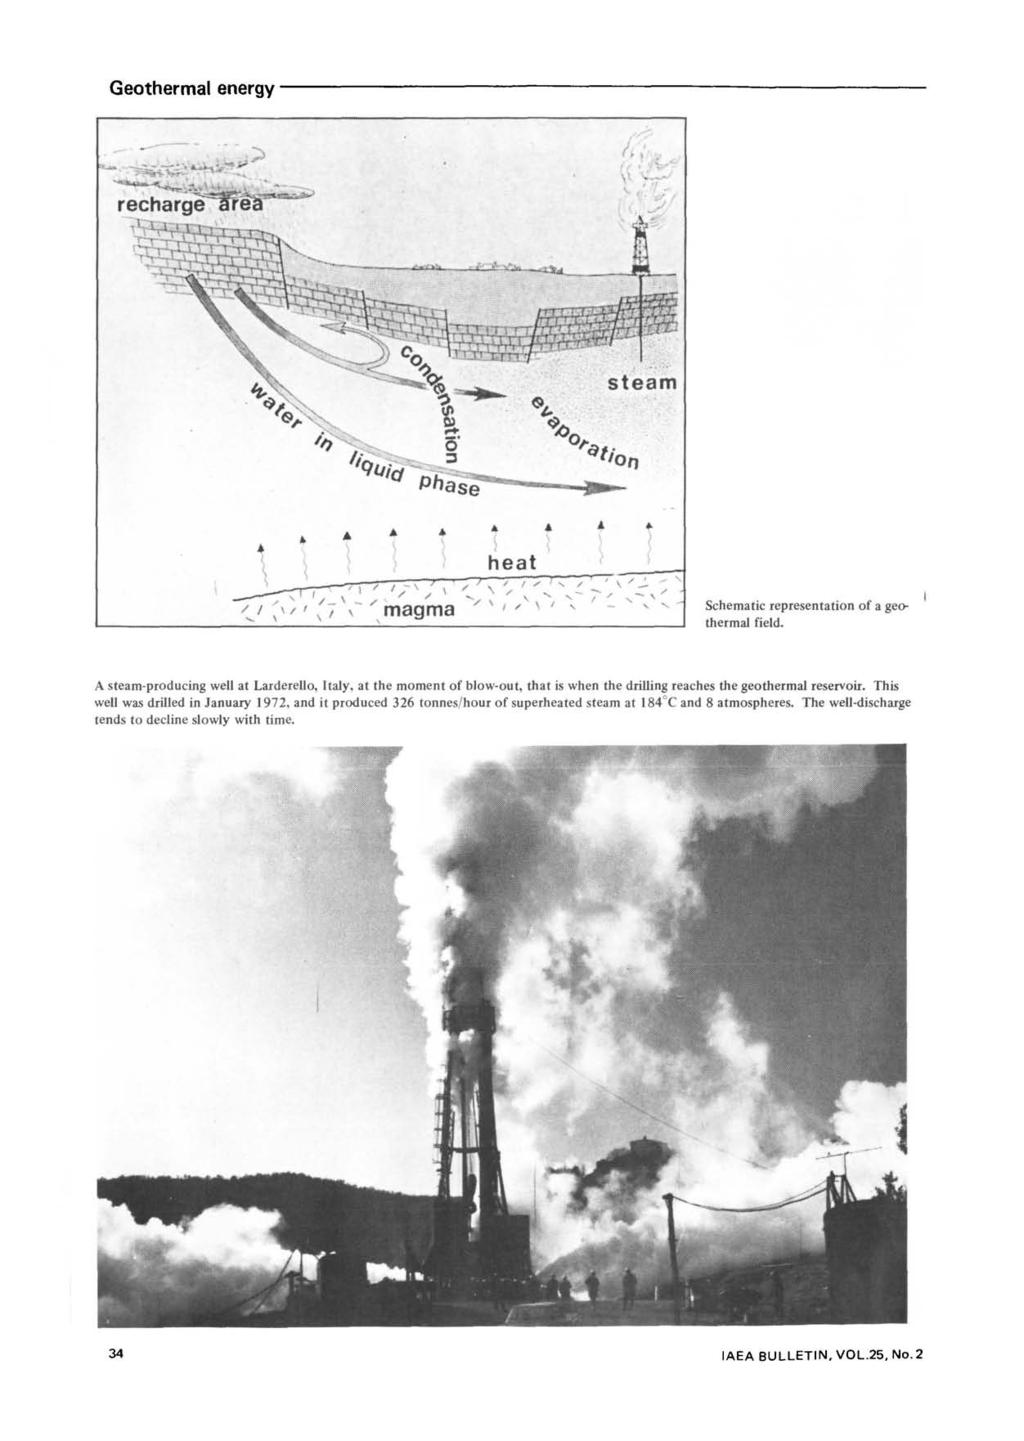 Schematic representation of a geothermal field. A steam-producing well at Larderello, Italy, at the moment of blow-out, that is when the drilling reaches the geothermal reservoir.